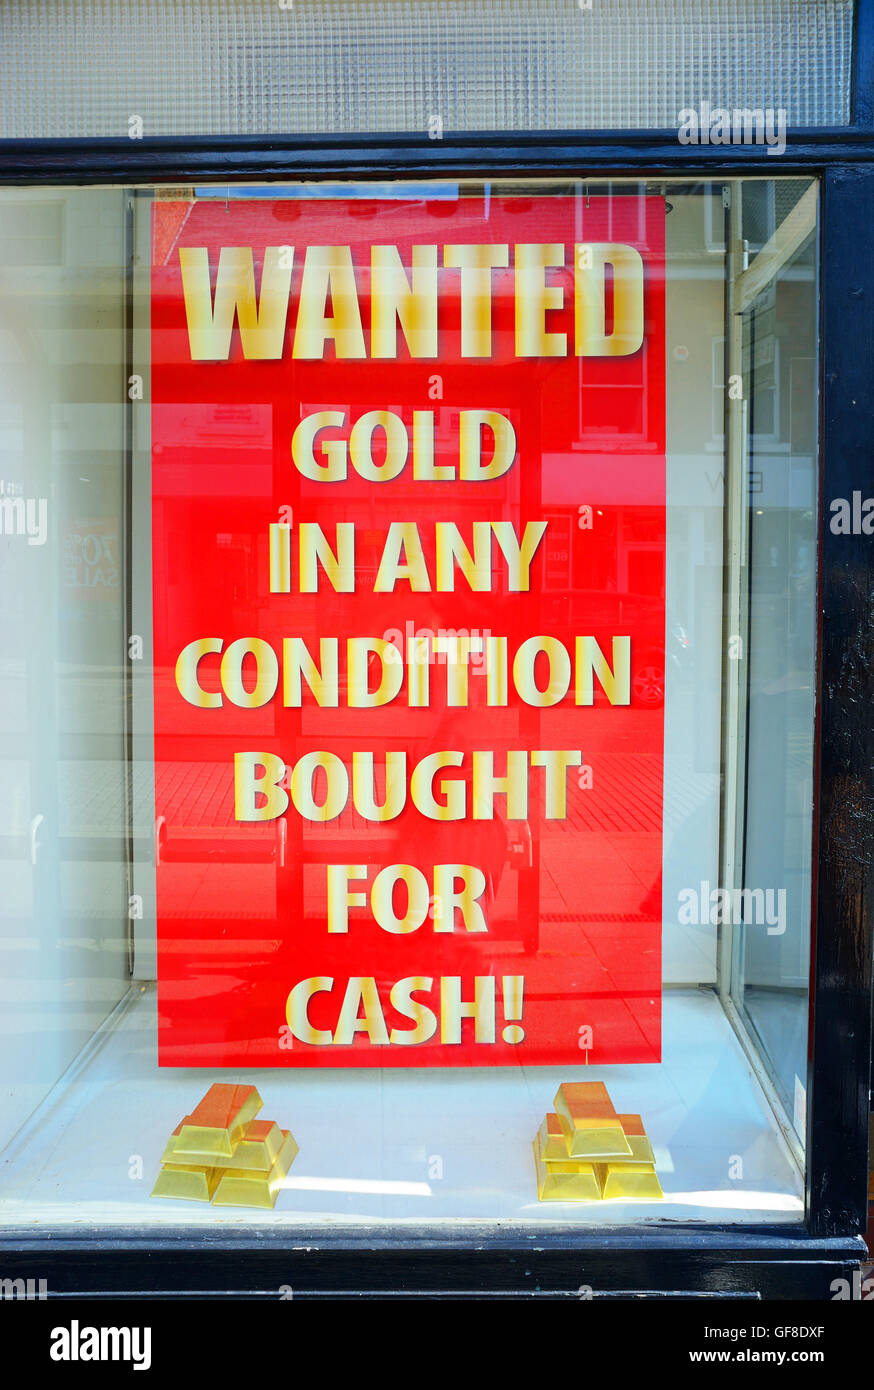 gold wanted sign in shop buying gold, silver, platinum, diamonds yorkshire united kingdom Stock Photo